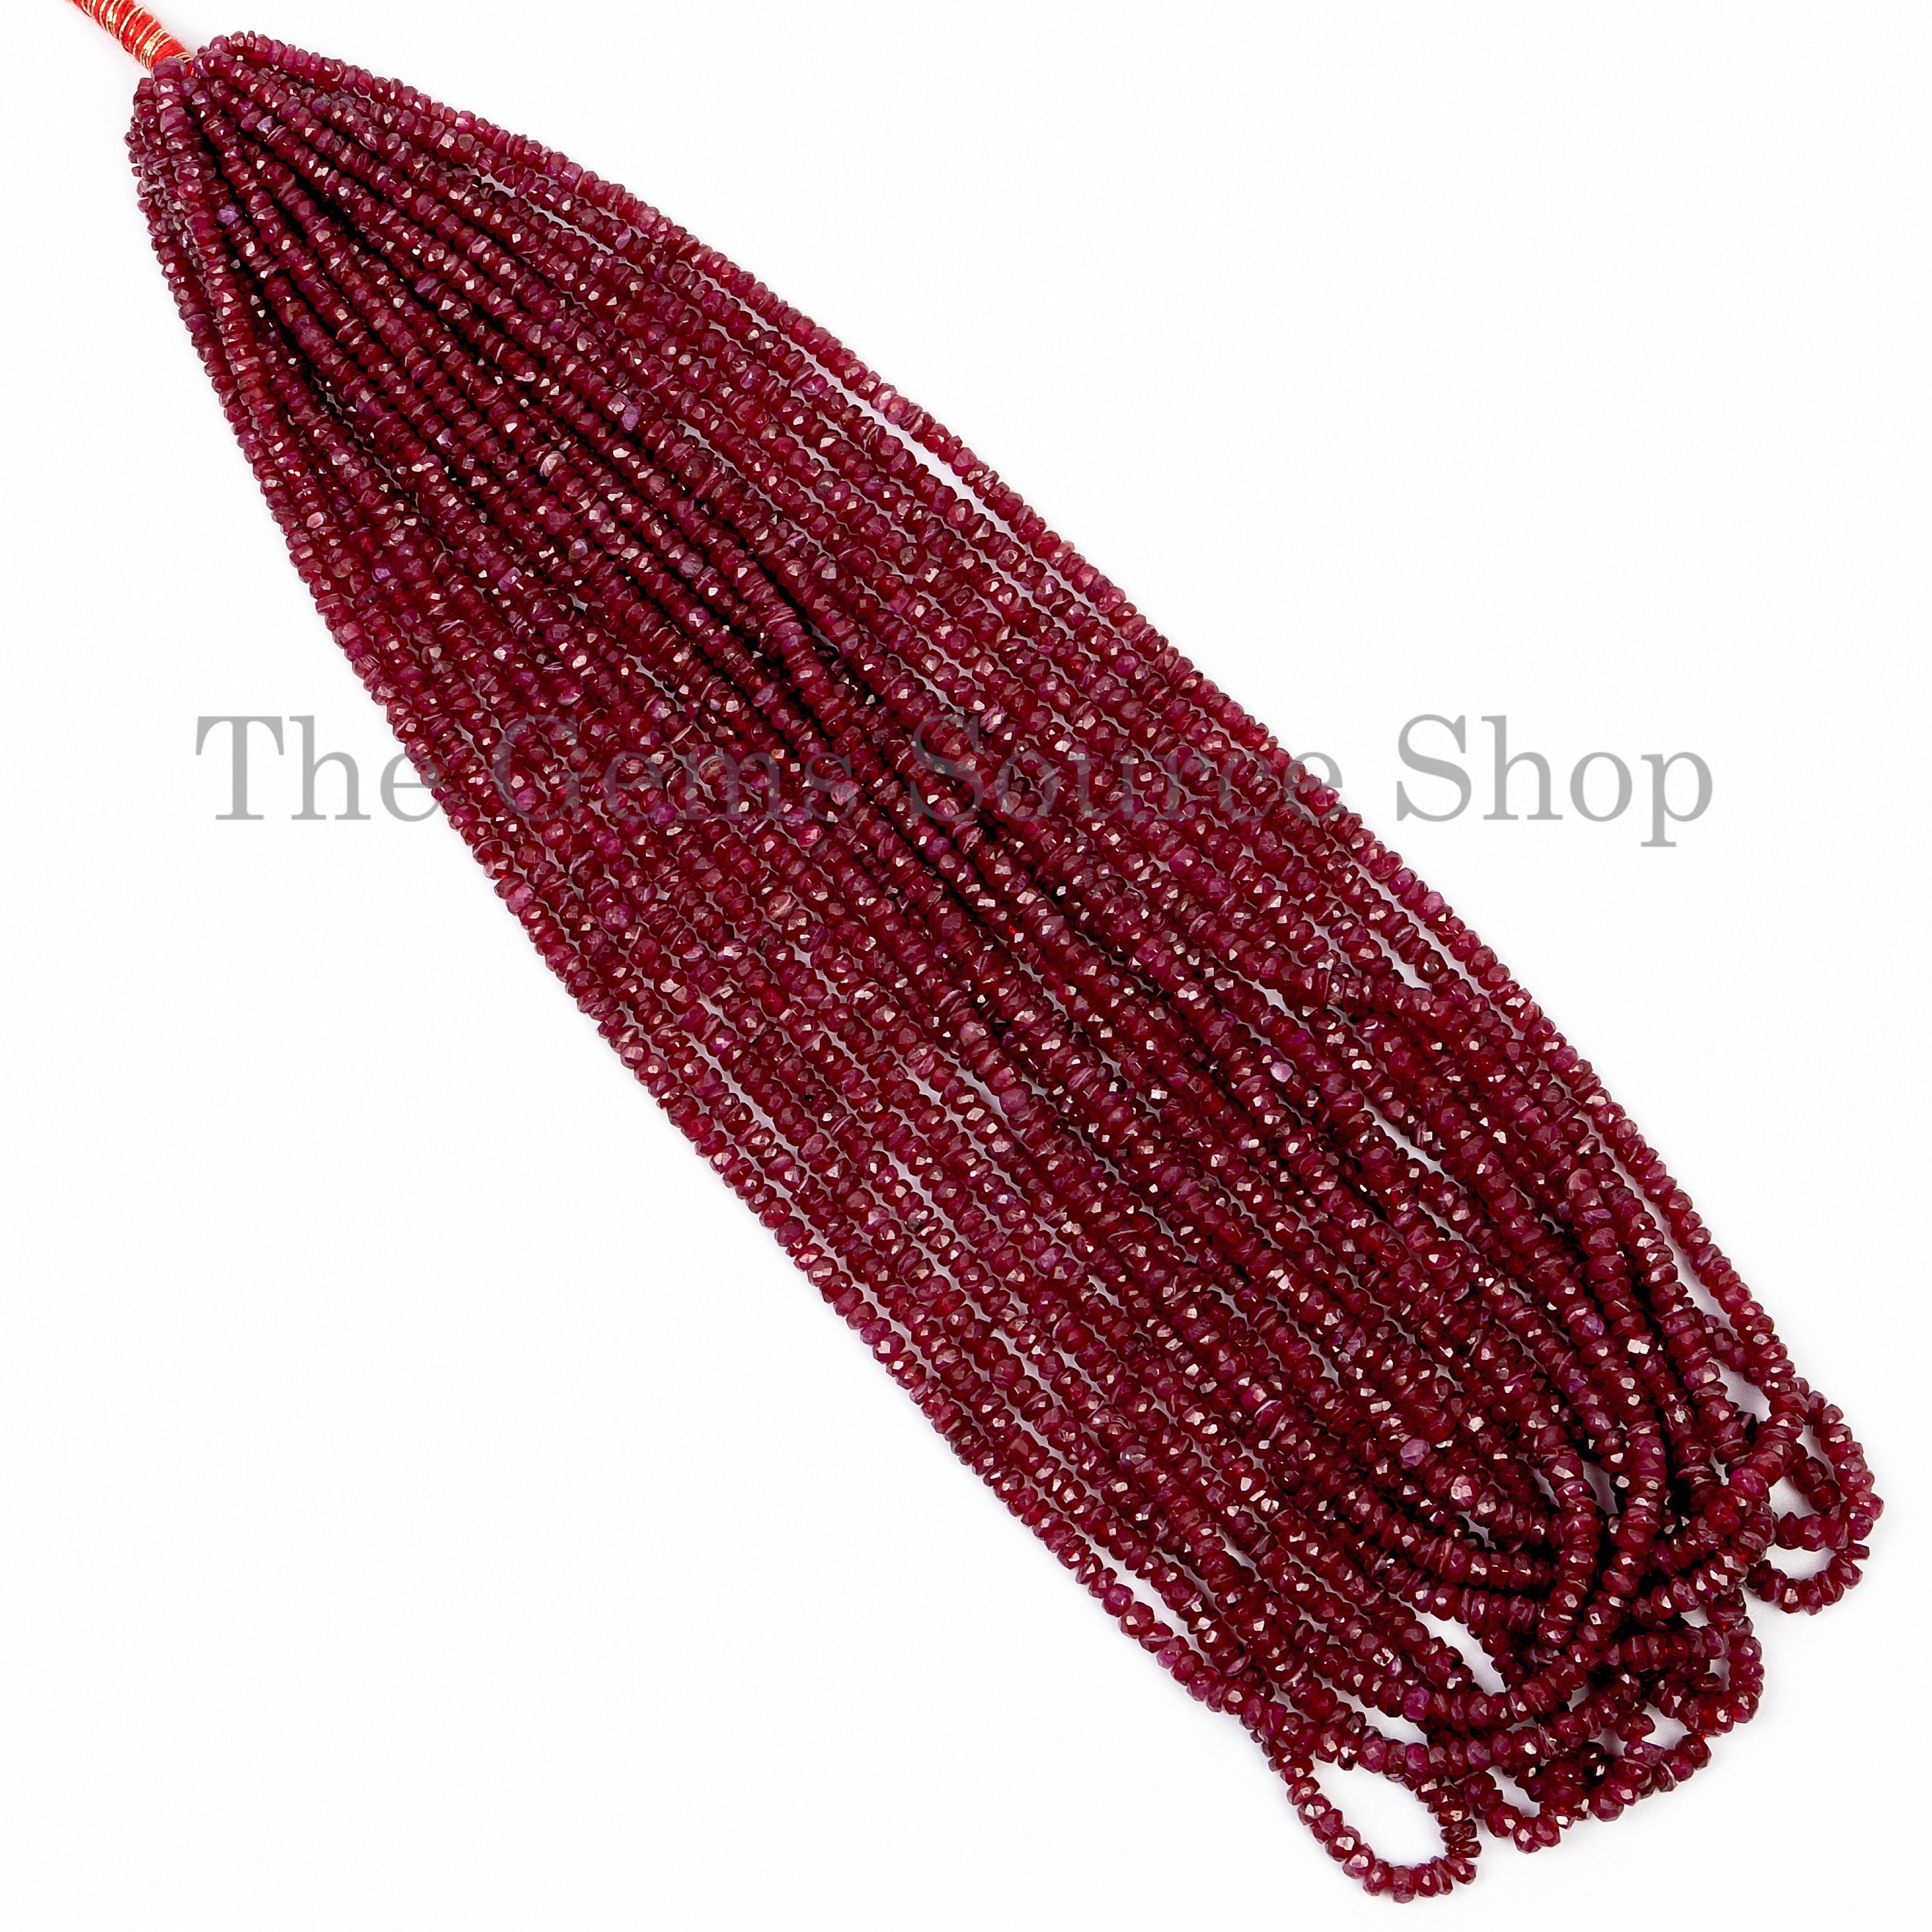 Natural ruby faceted rondelle beads, 2.5-3.5mm ruby faceted round beads for jewelry making, TGS-5048